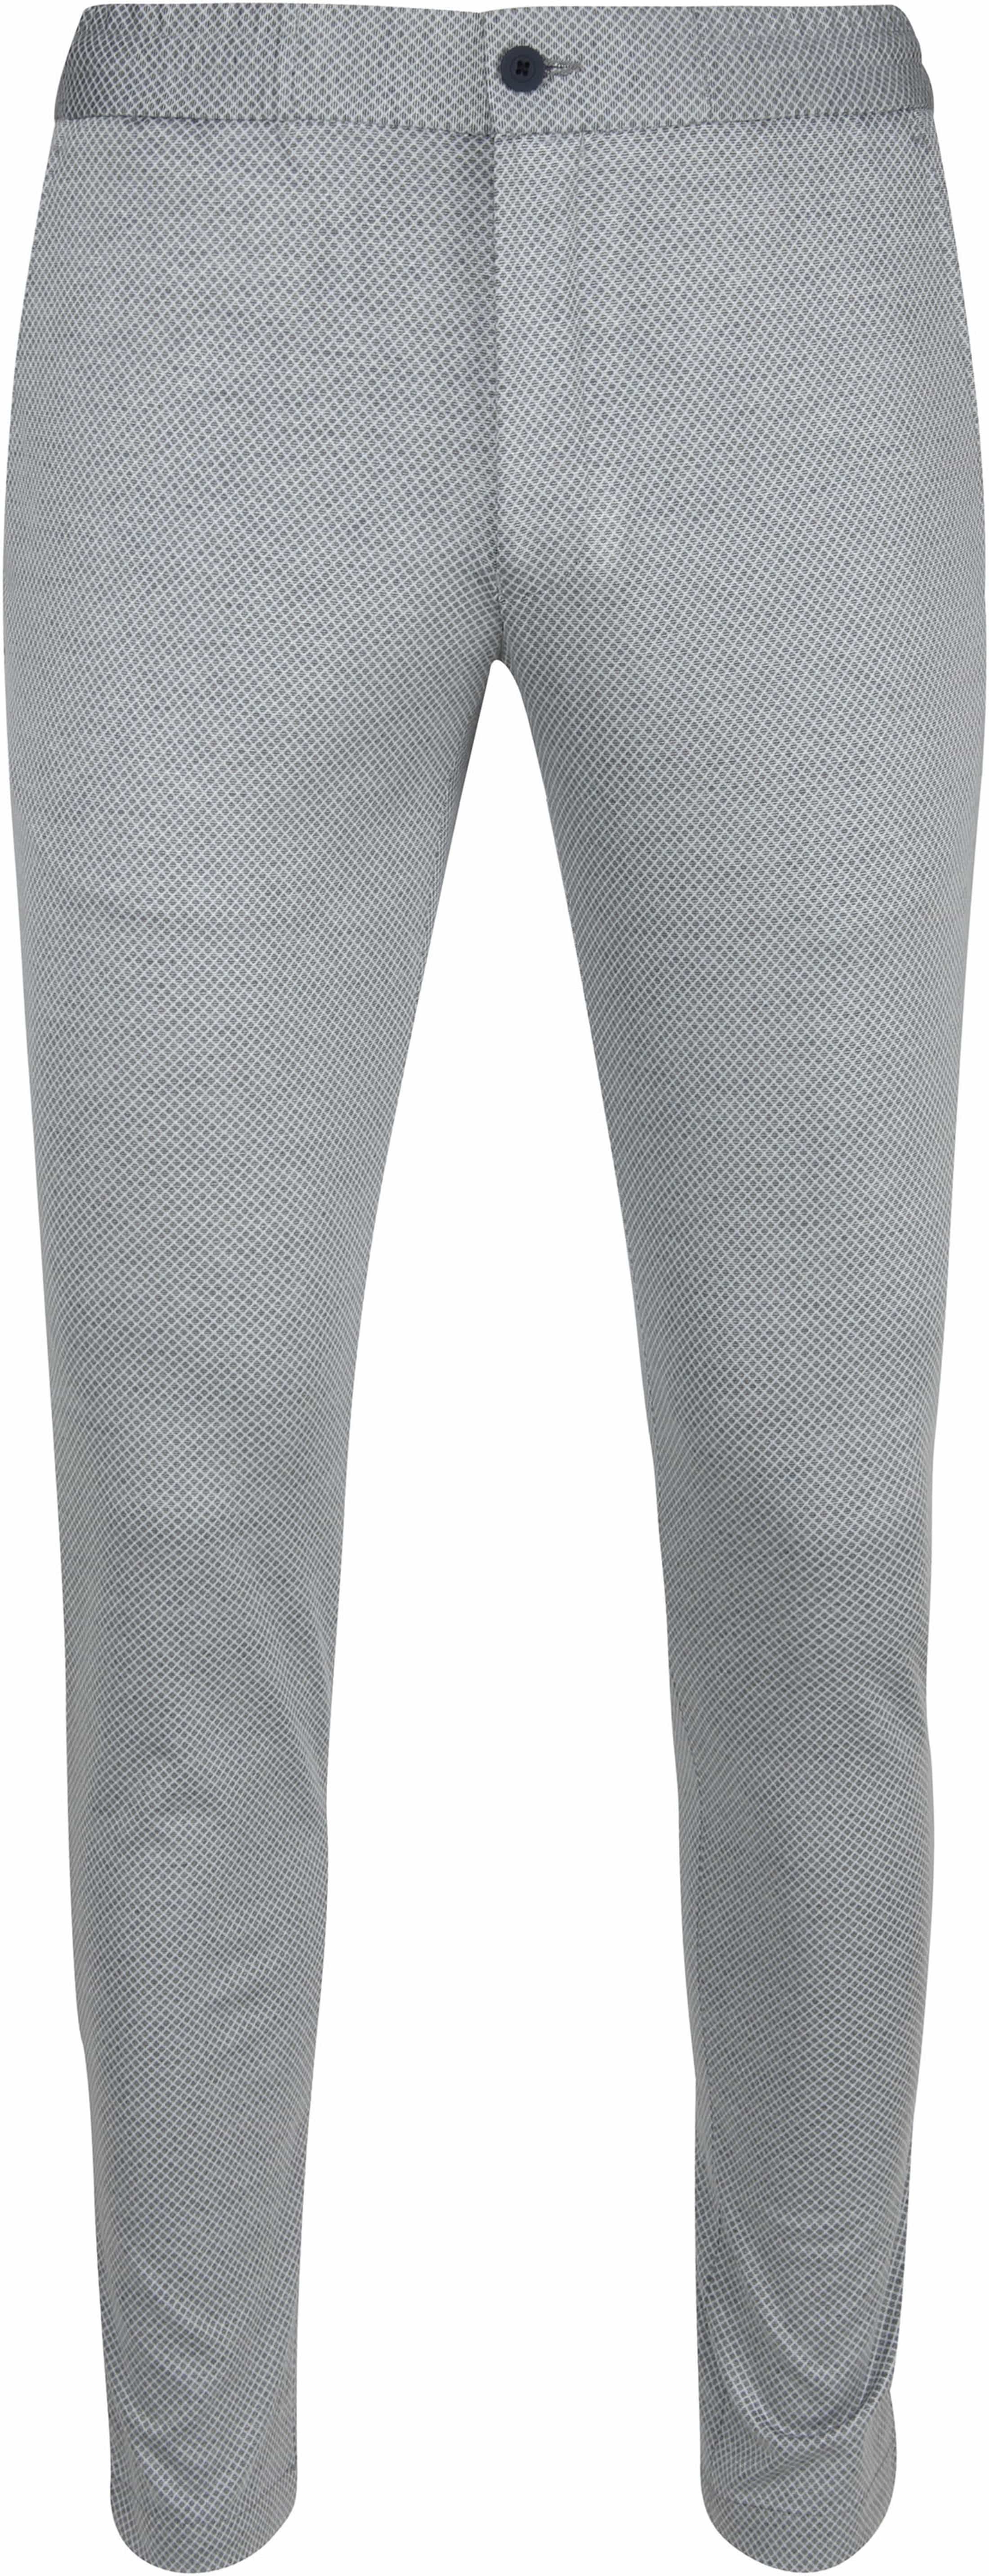 Suitable Jog Trousers Bithlo Grey size 36-R